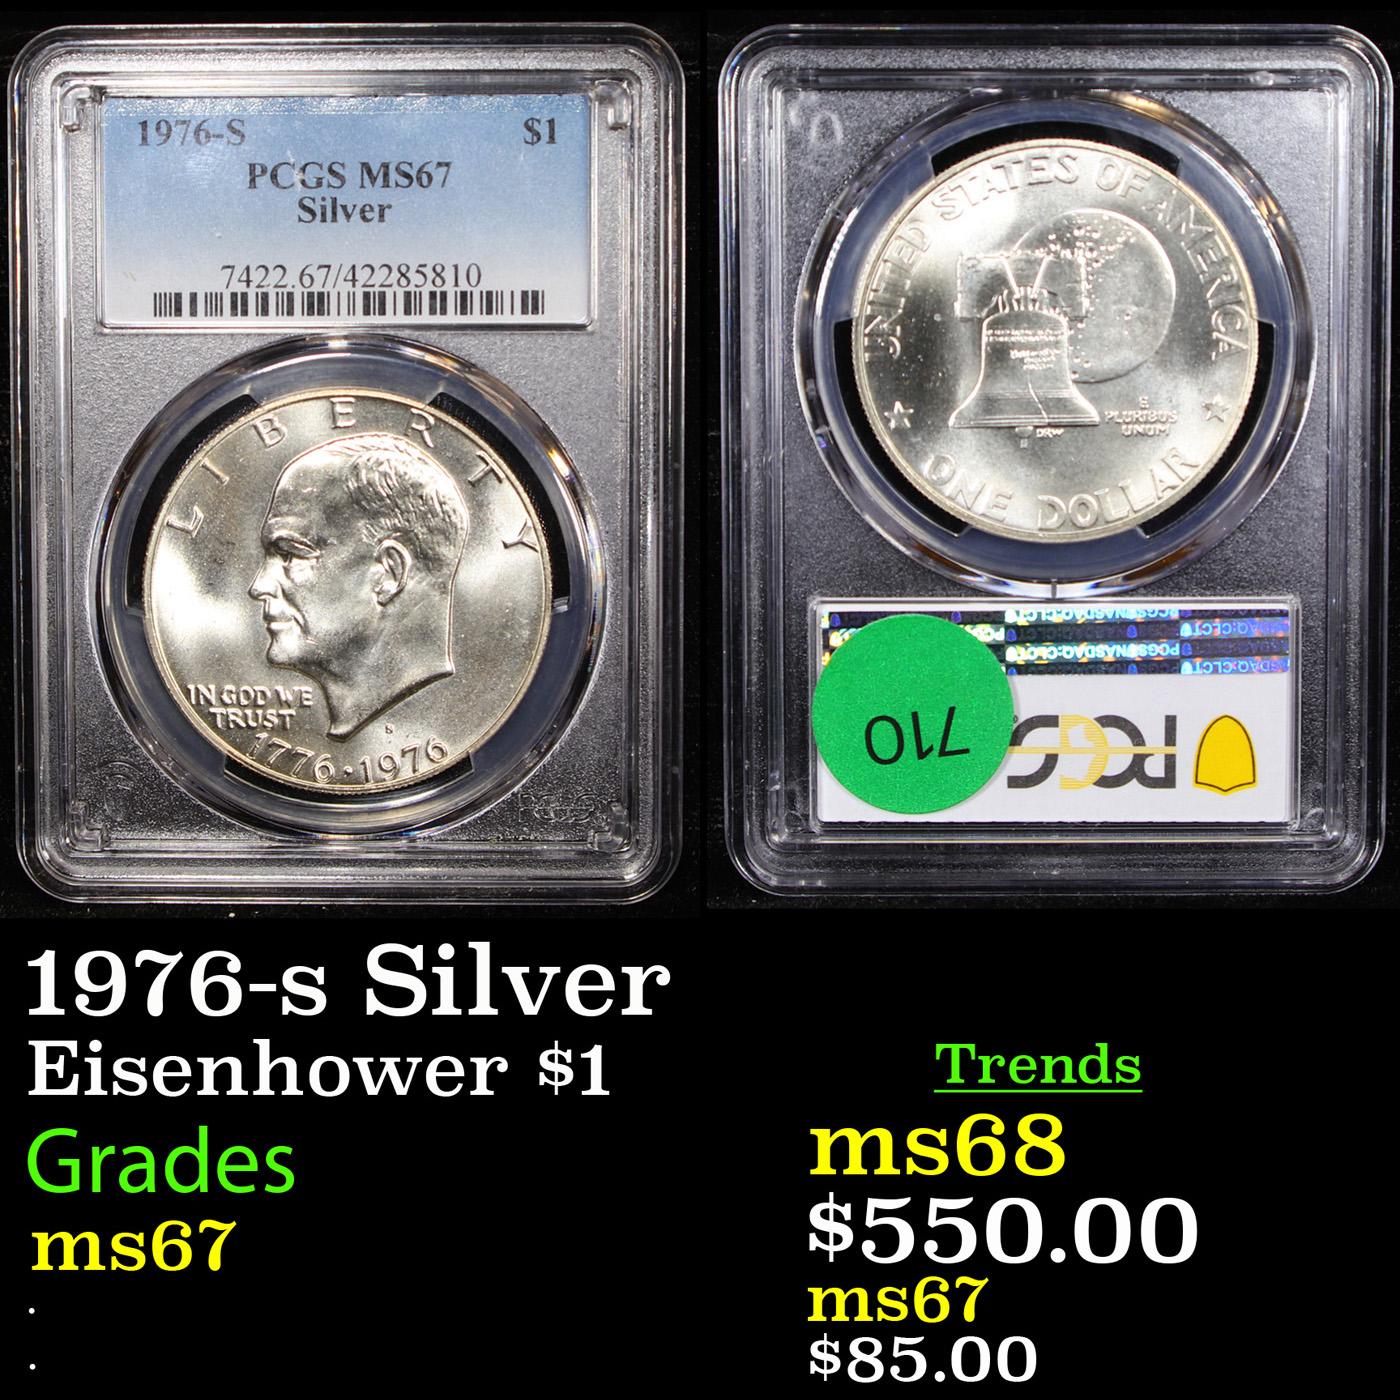 1976-s Silver Eisenhower Dollar $1 Graded ms67 By PCGS